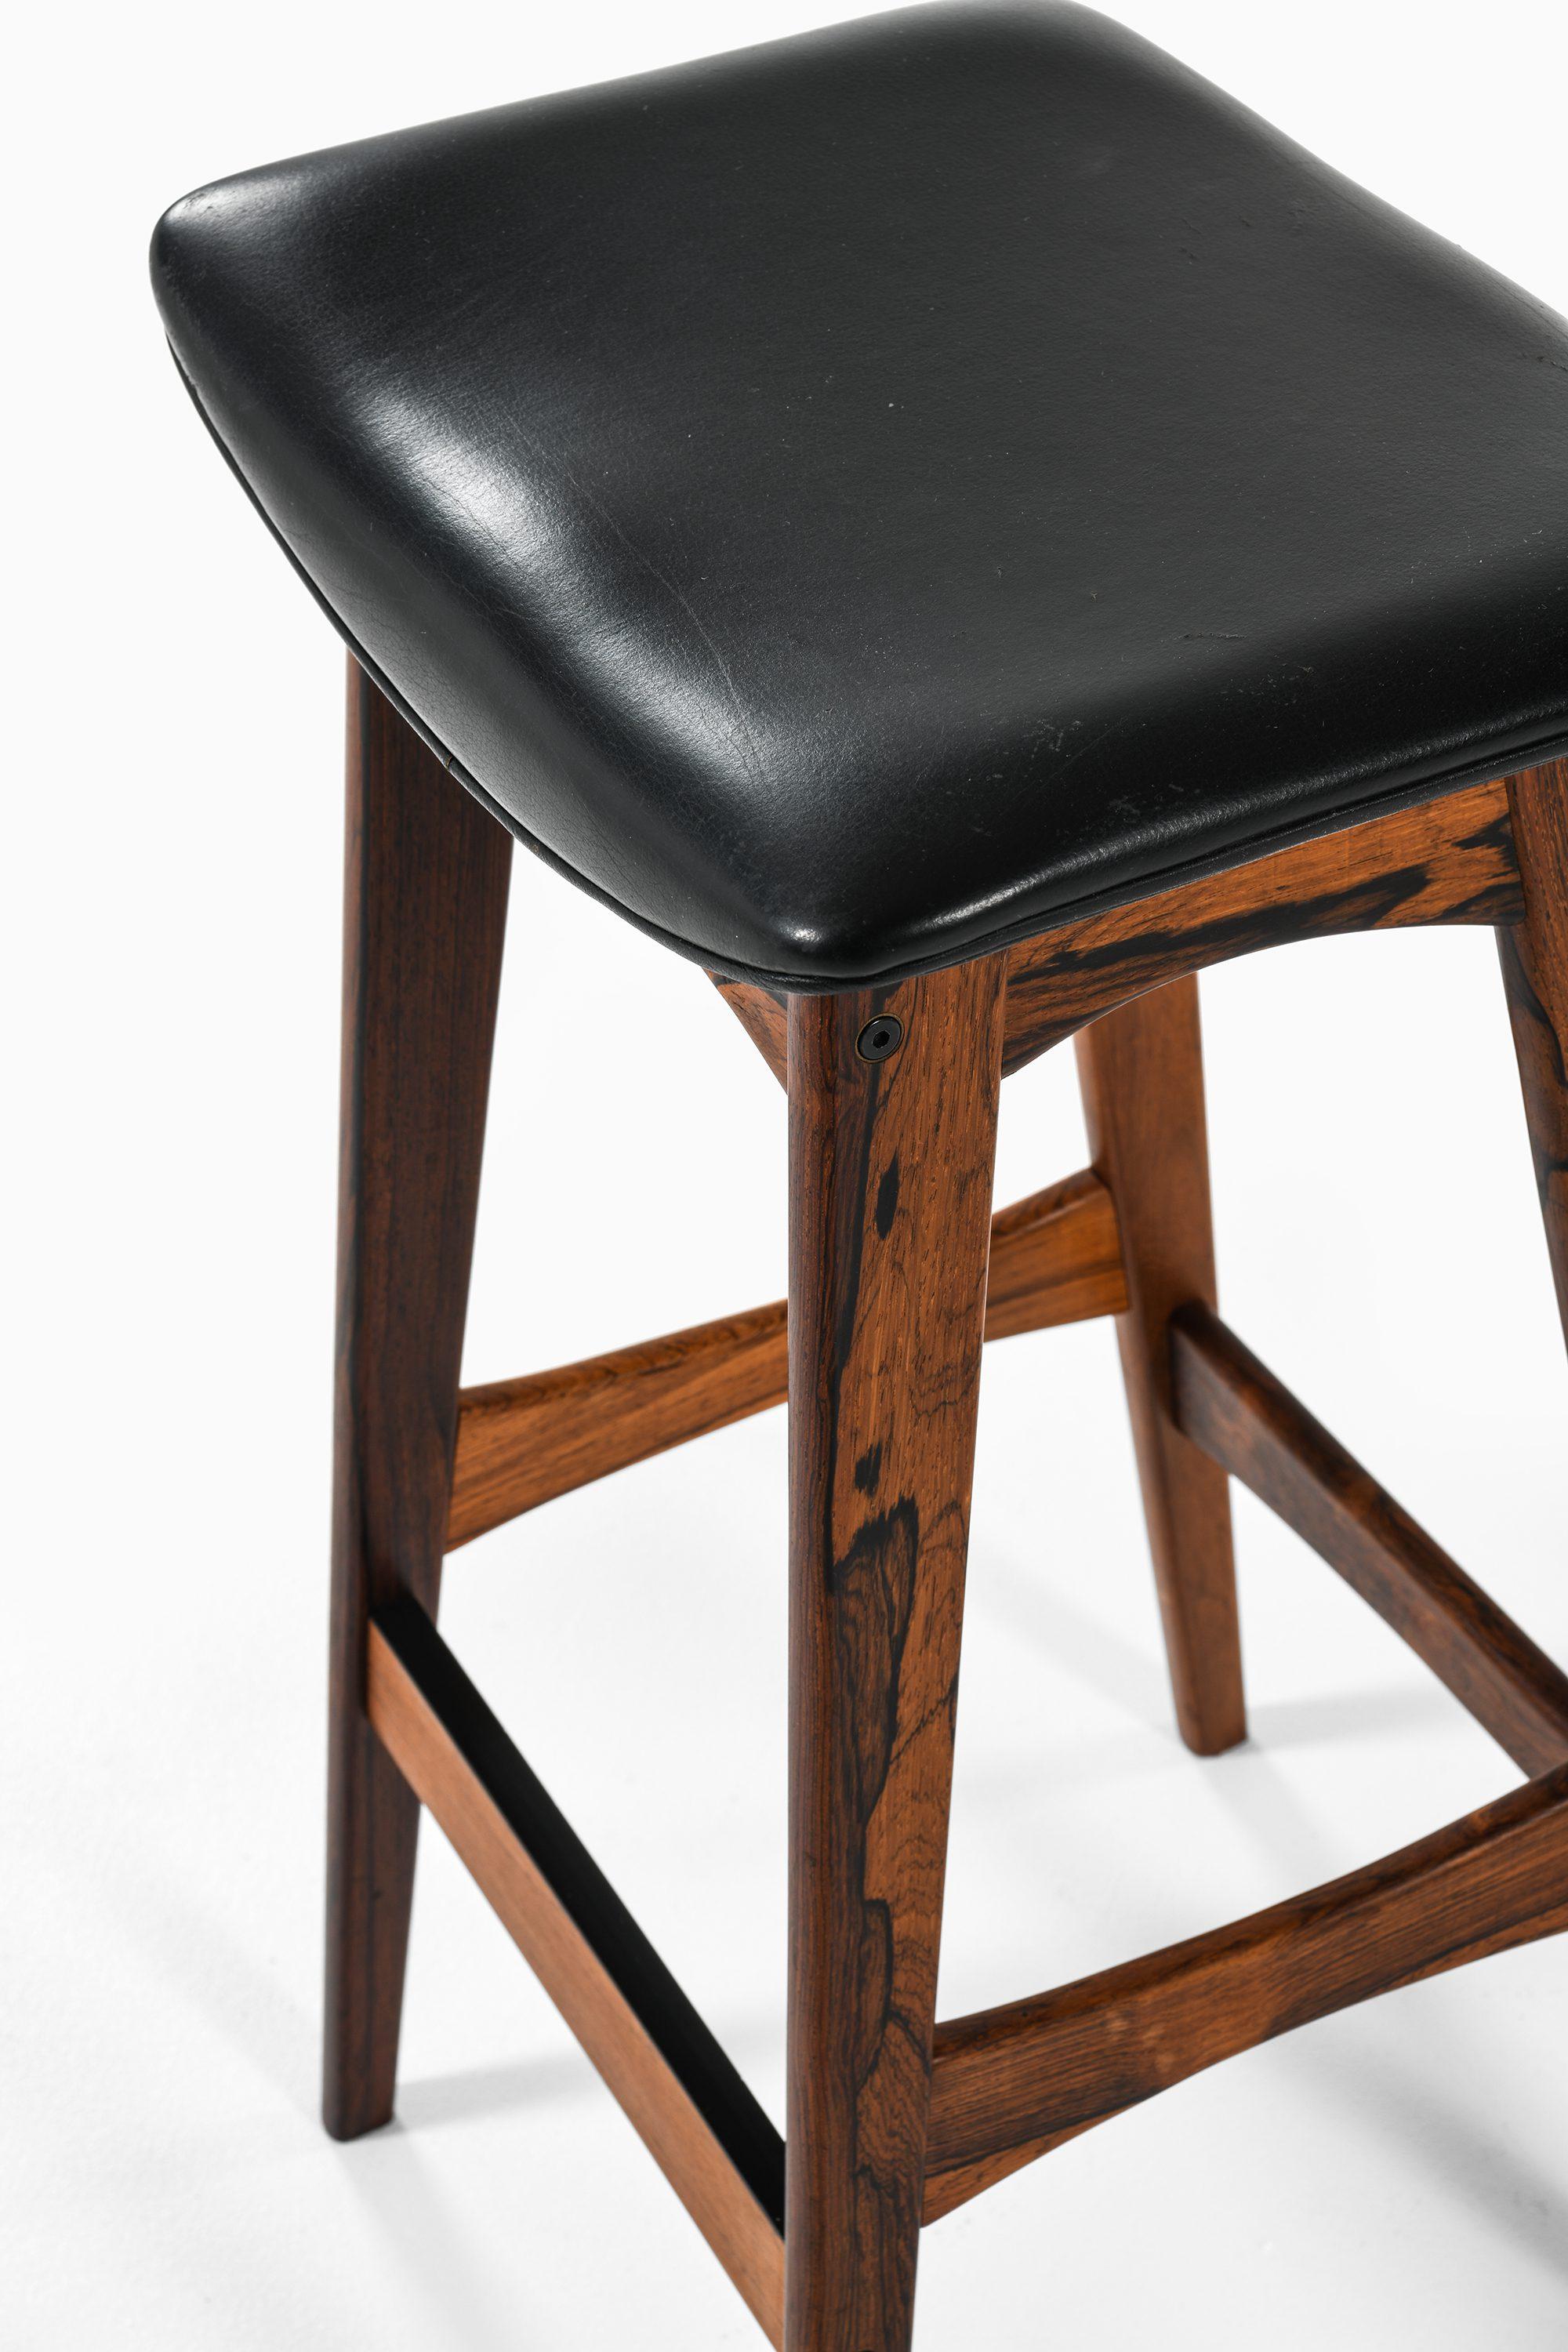 Scandinavian Modern Set of 3 Bar Stools in Rosewood and Black Leather by Johannes Andersen, 1961 For Sale